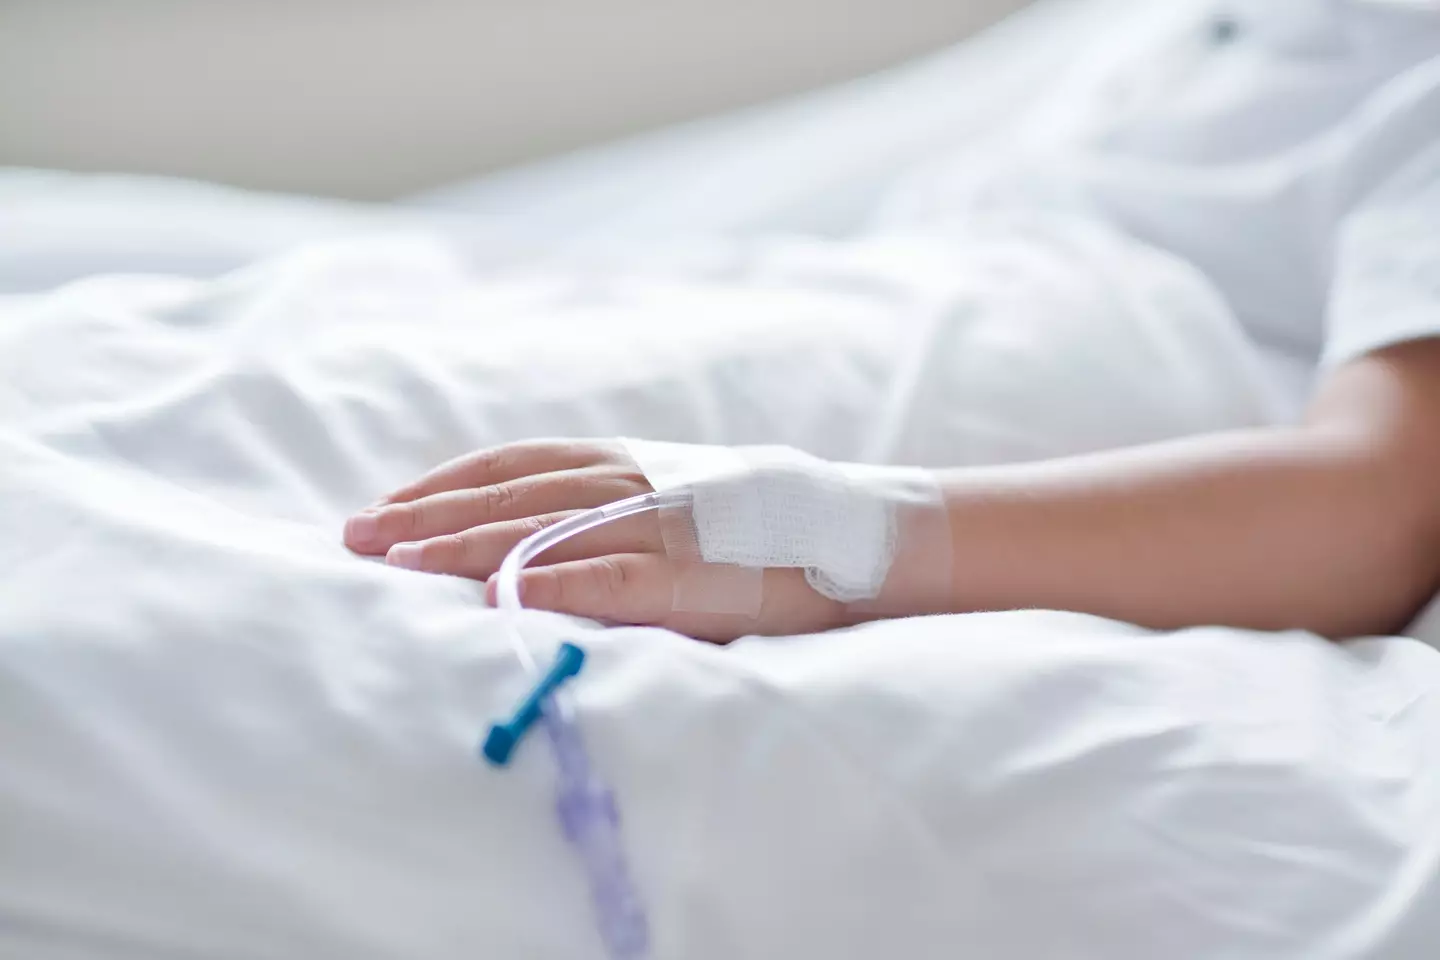 Swiss clinic Dignitas offers two methods of assisted suicide, one of which involves the insertion of a cannula. (Getty Stock Image)